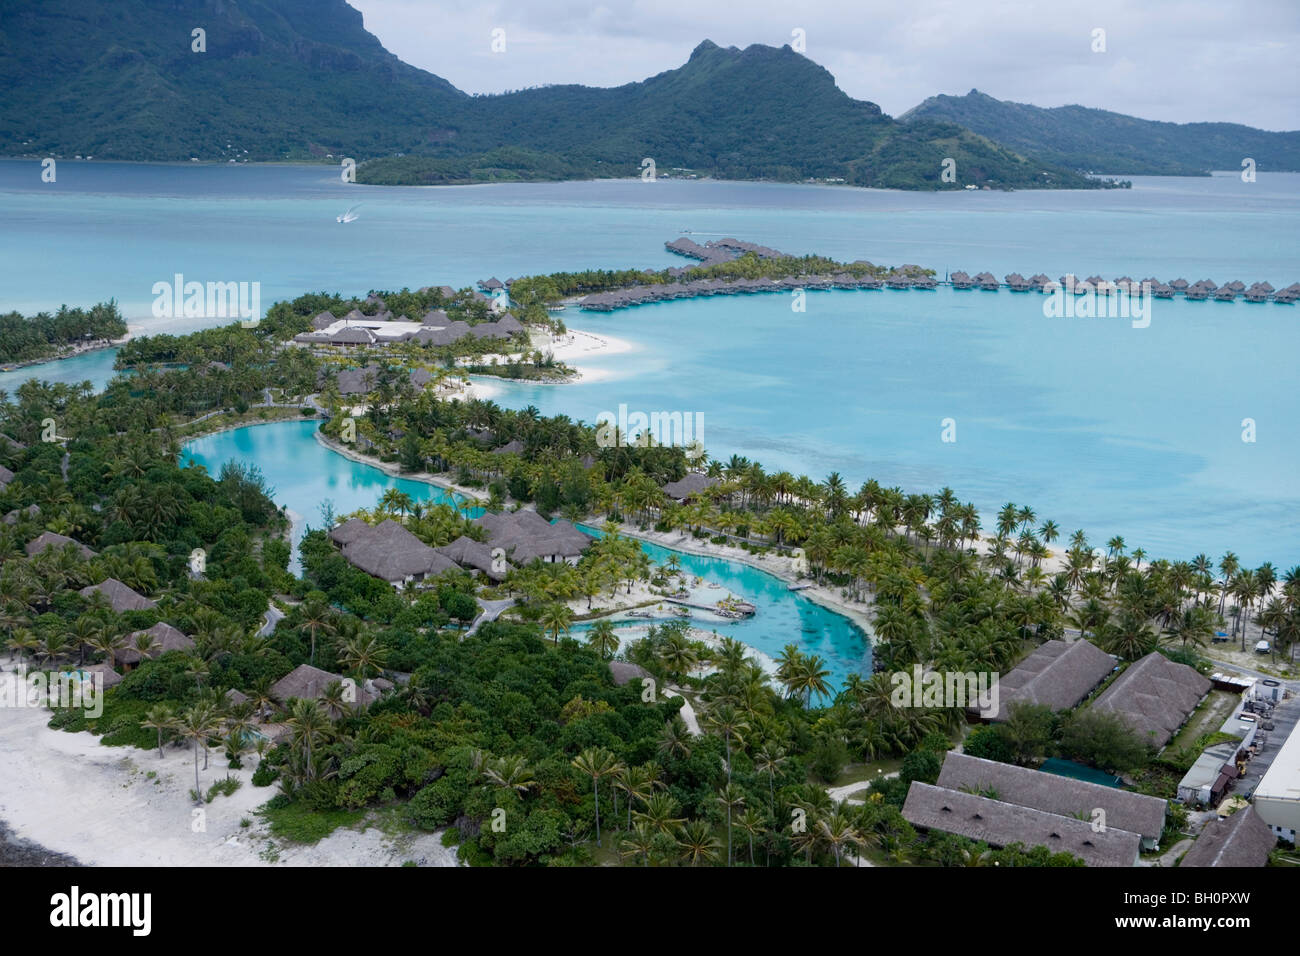 Aerial view of hotel complex with many bungalows, Bora Bora, Society Islands, French Polynesia, South Pacific, Oceania Stock Photo